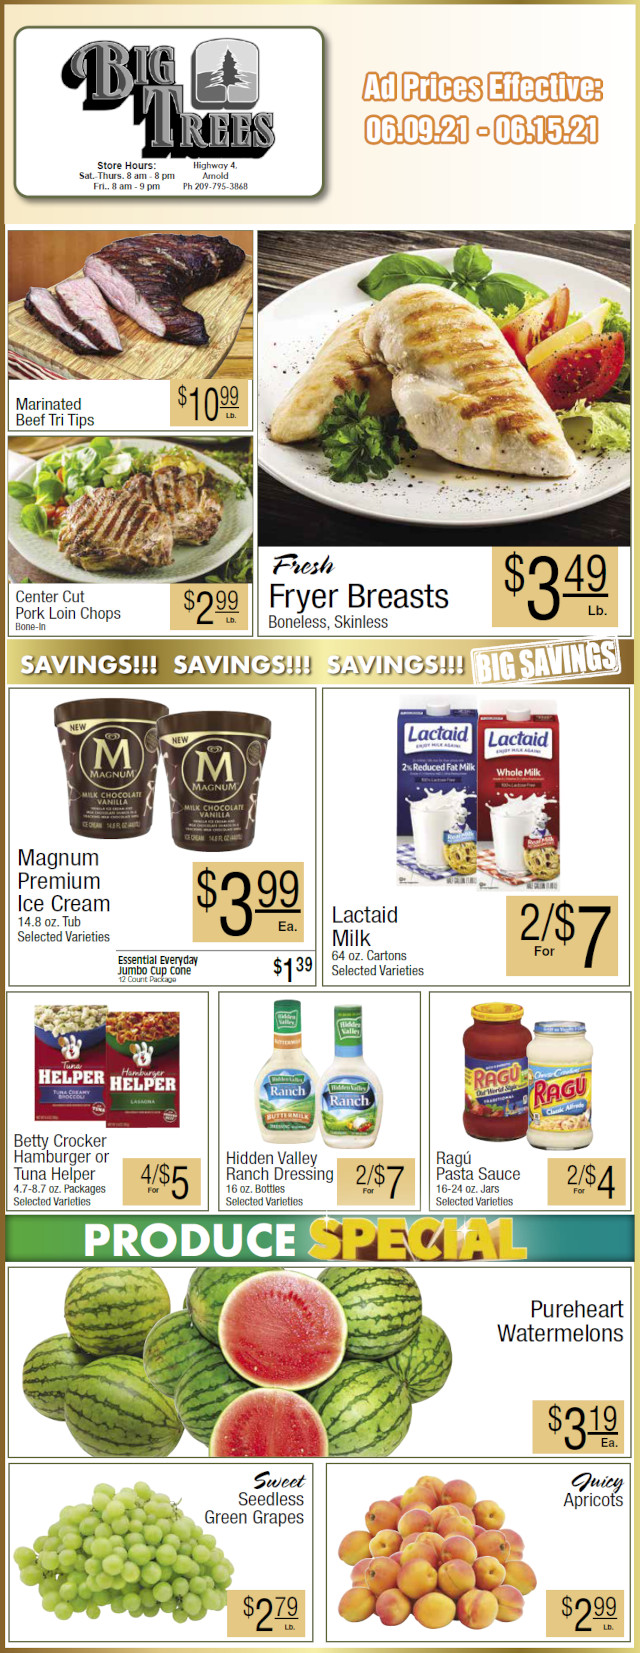 Big Trees Market Weekly Ad & Grocery Specials Through June 15th! Shop Local & Save!!